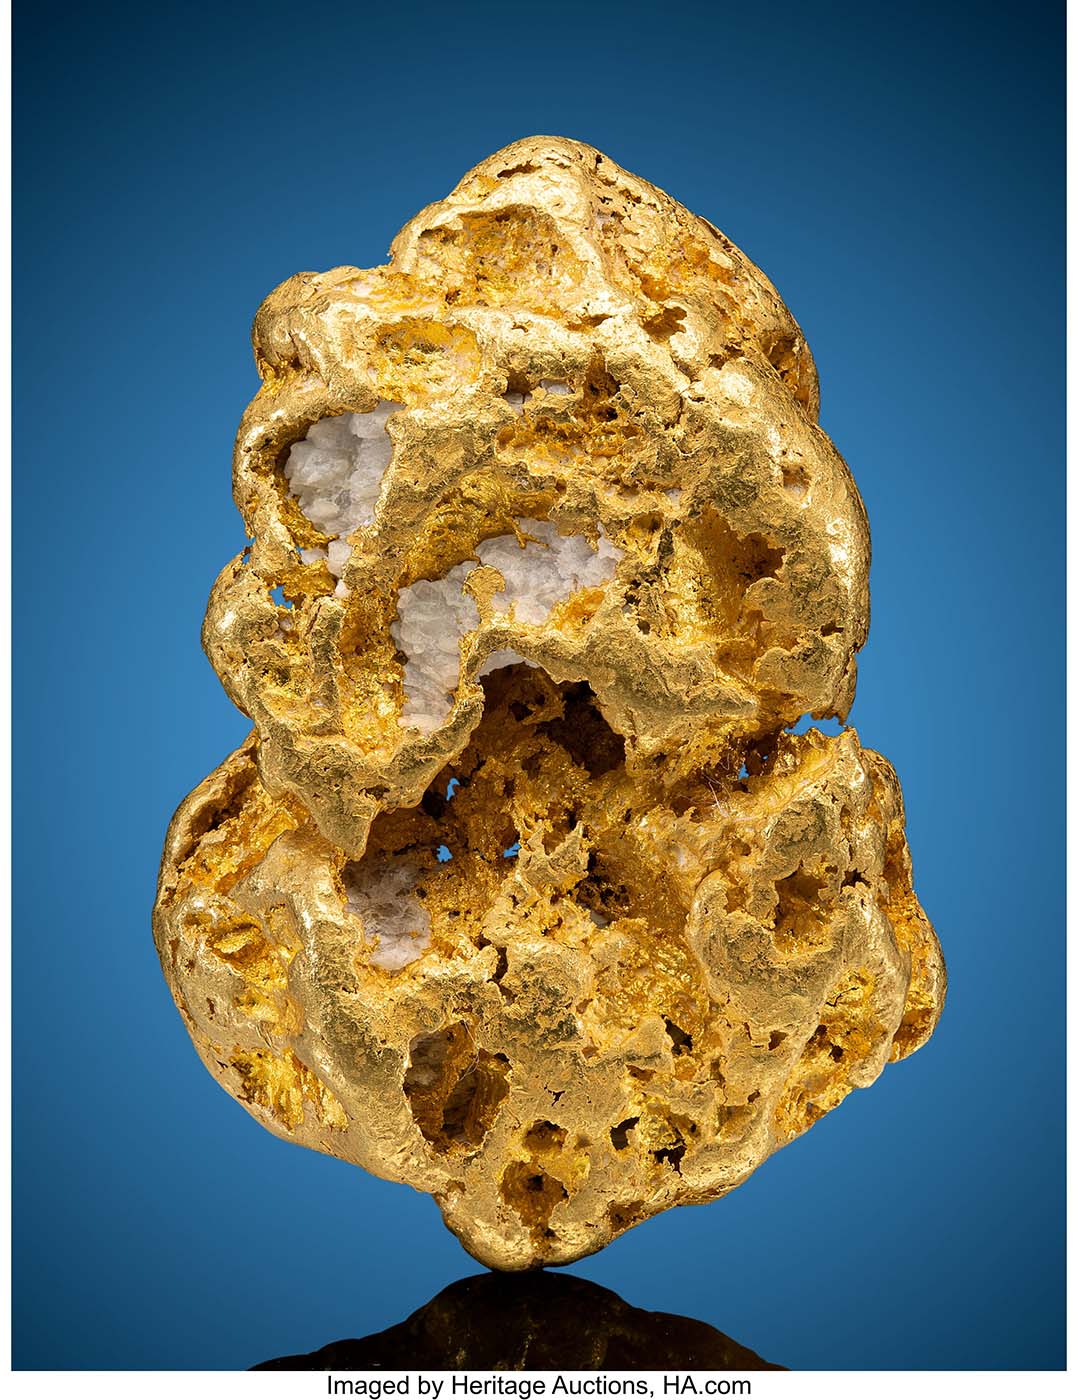 Family Discovers 2 Gold Nuggets Worth More Than $252,000